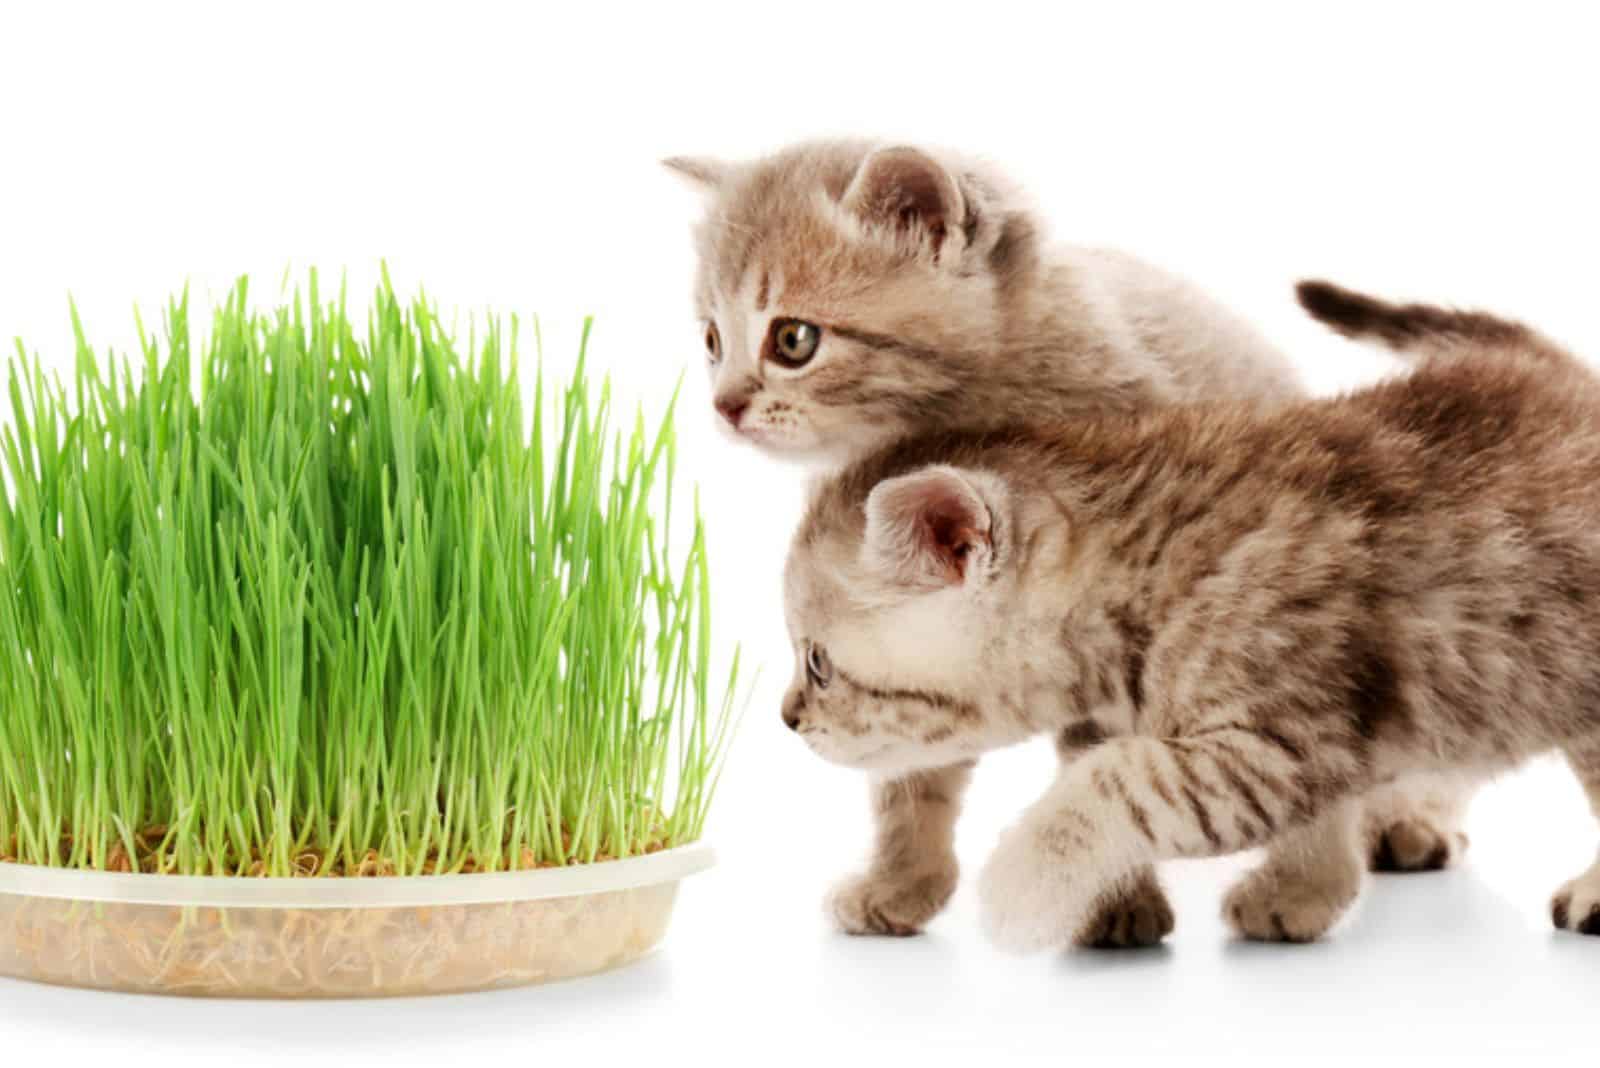 Cute kittens and wheat grass